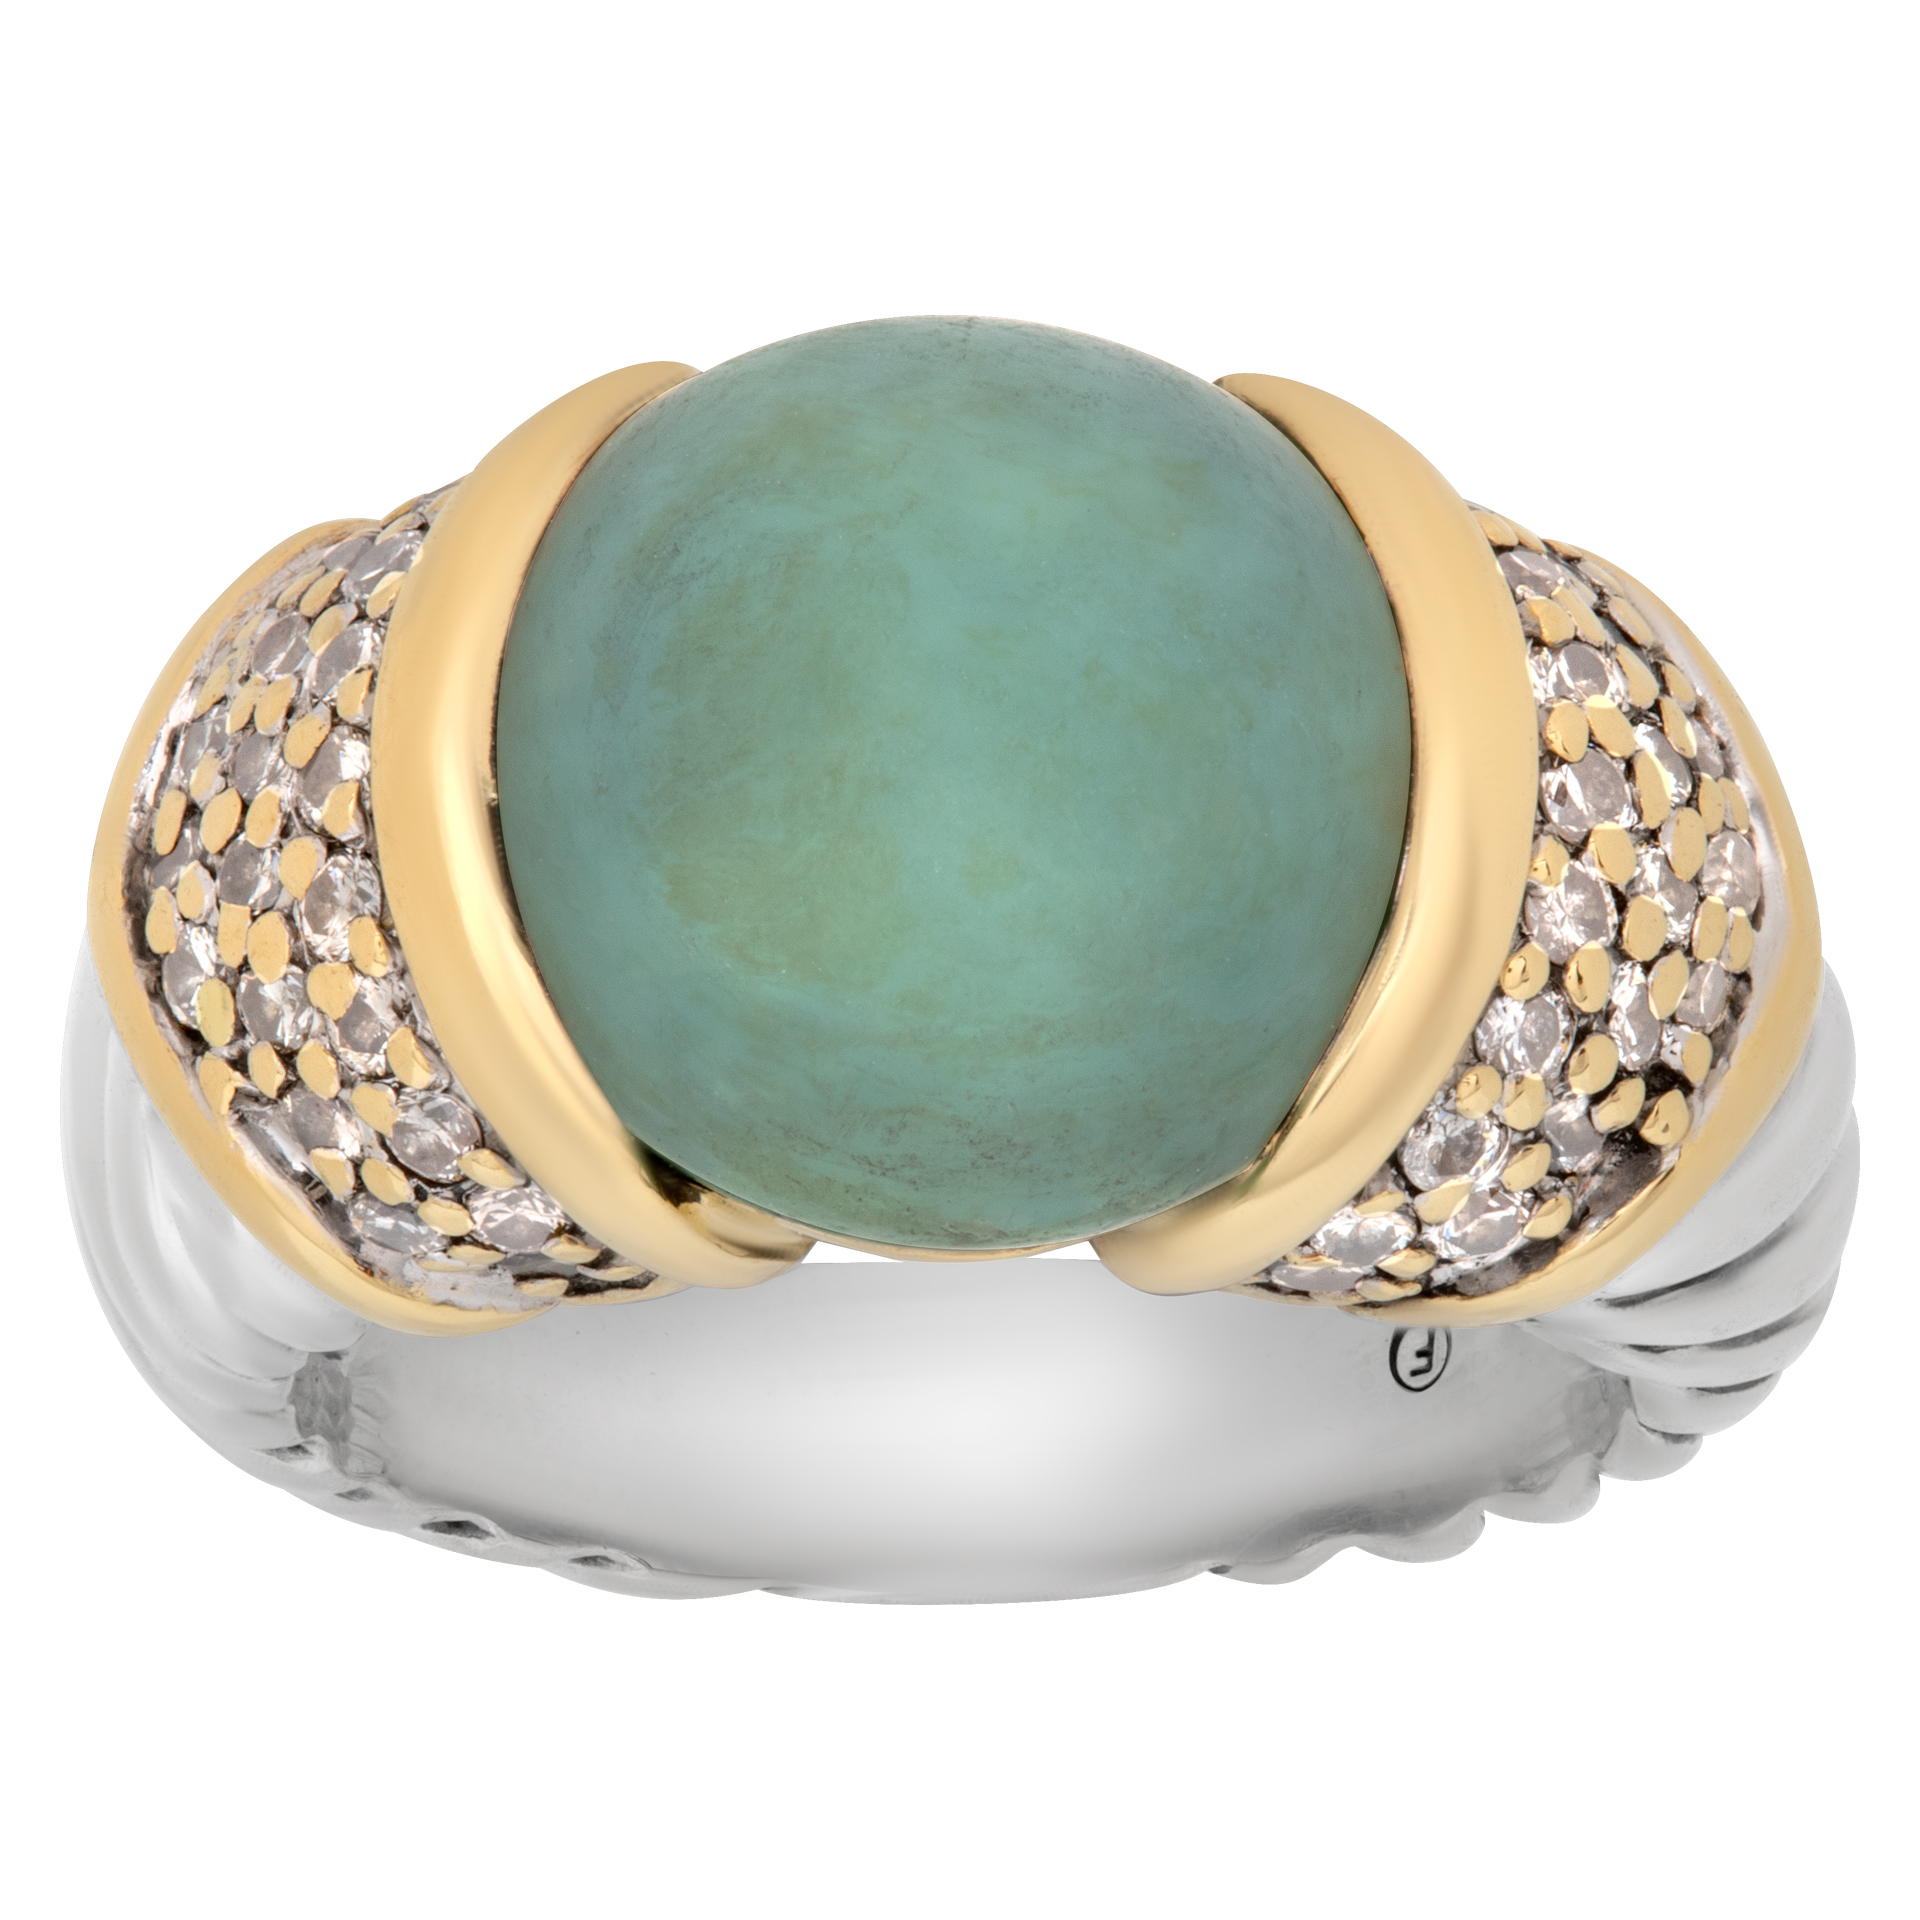 Effy Ring In 925 Sterling Silver, 18k Yellow Gold And Diamond Accents W Green Stone